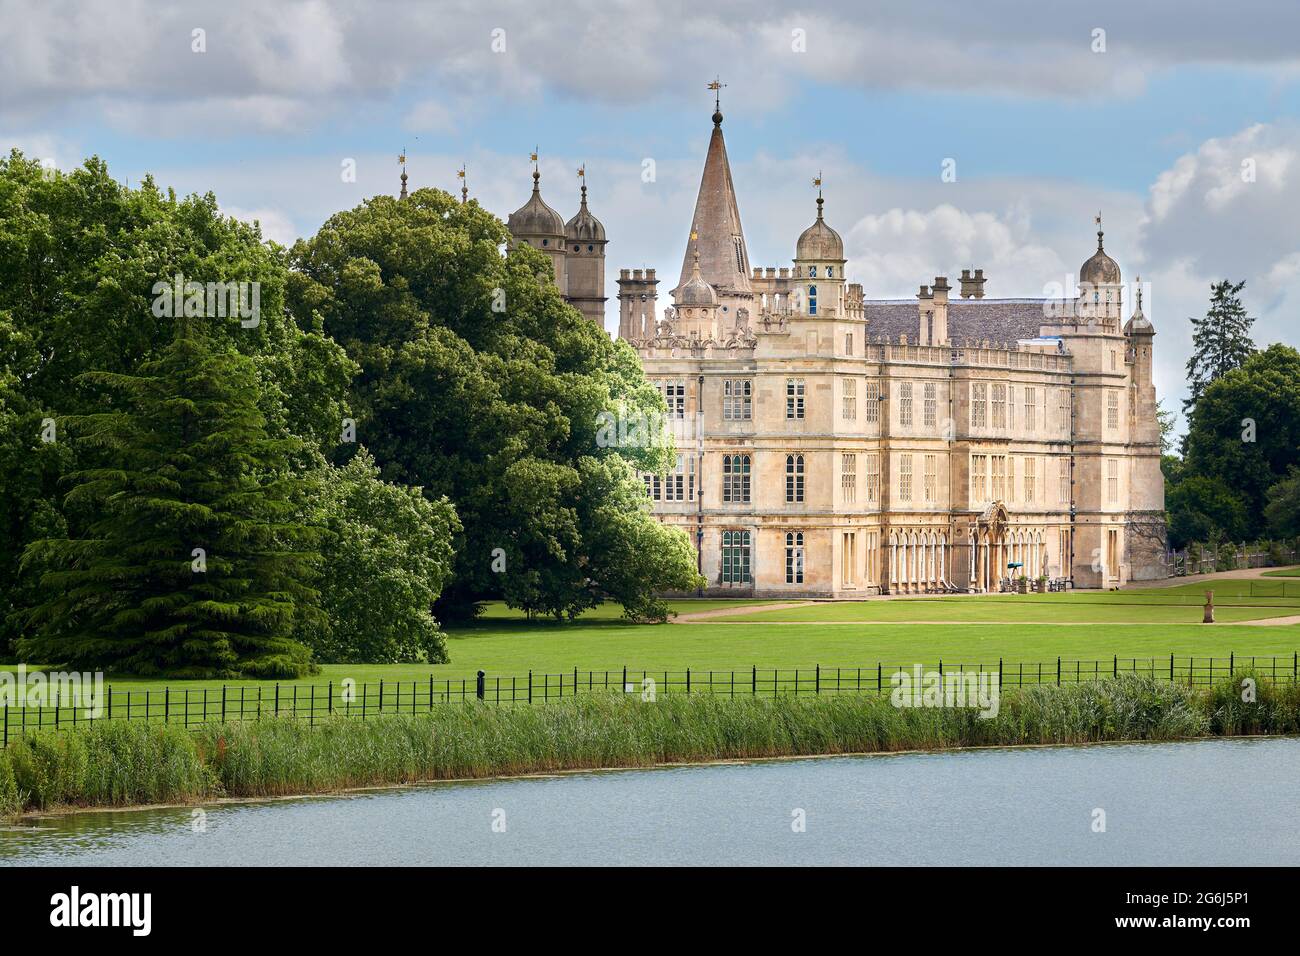 Burghley House, an elizabethan mansion built in the sixteenth century by William Cecil, treasurer to queen Elizabeth I of England. Stock Photo